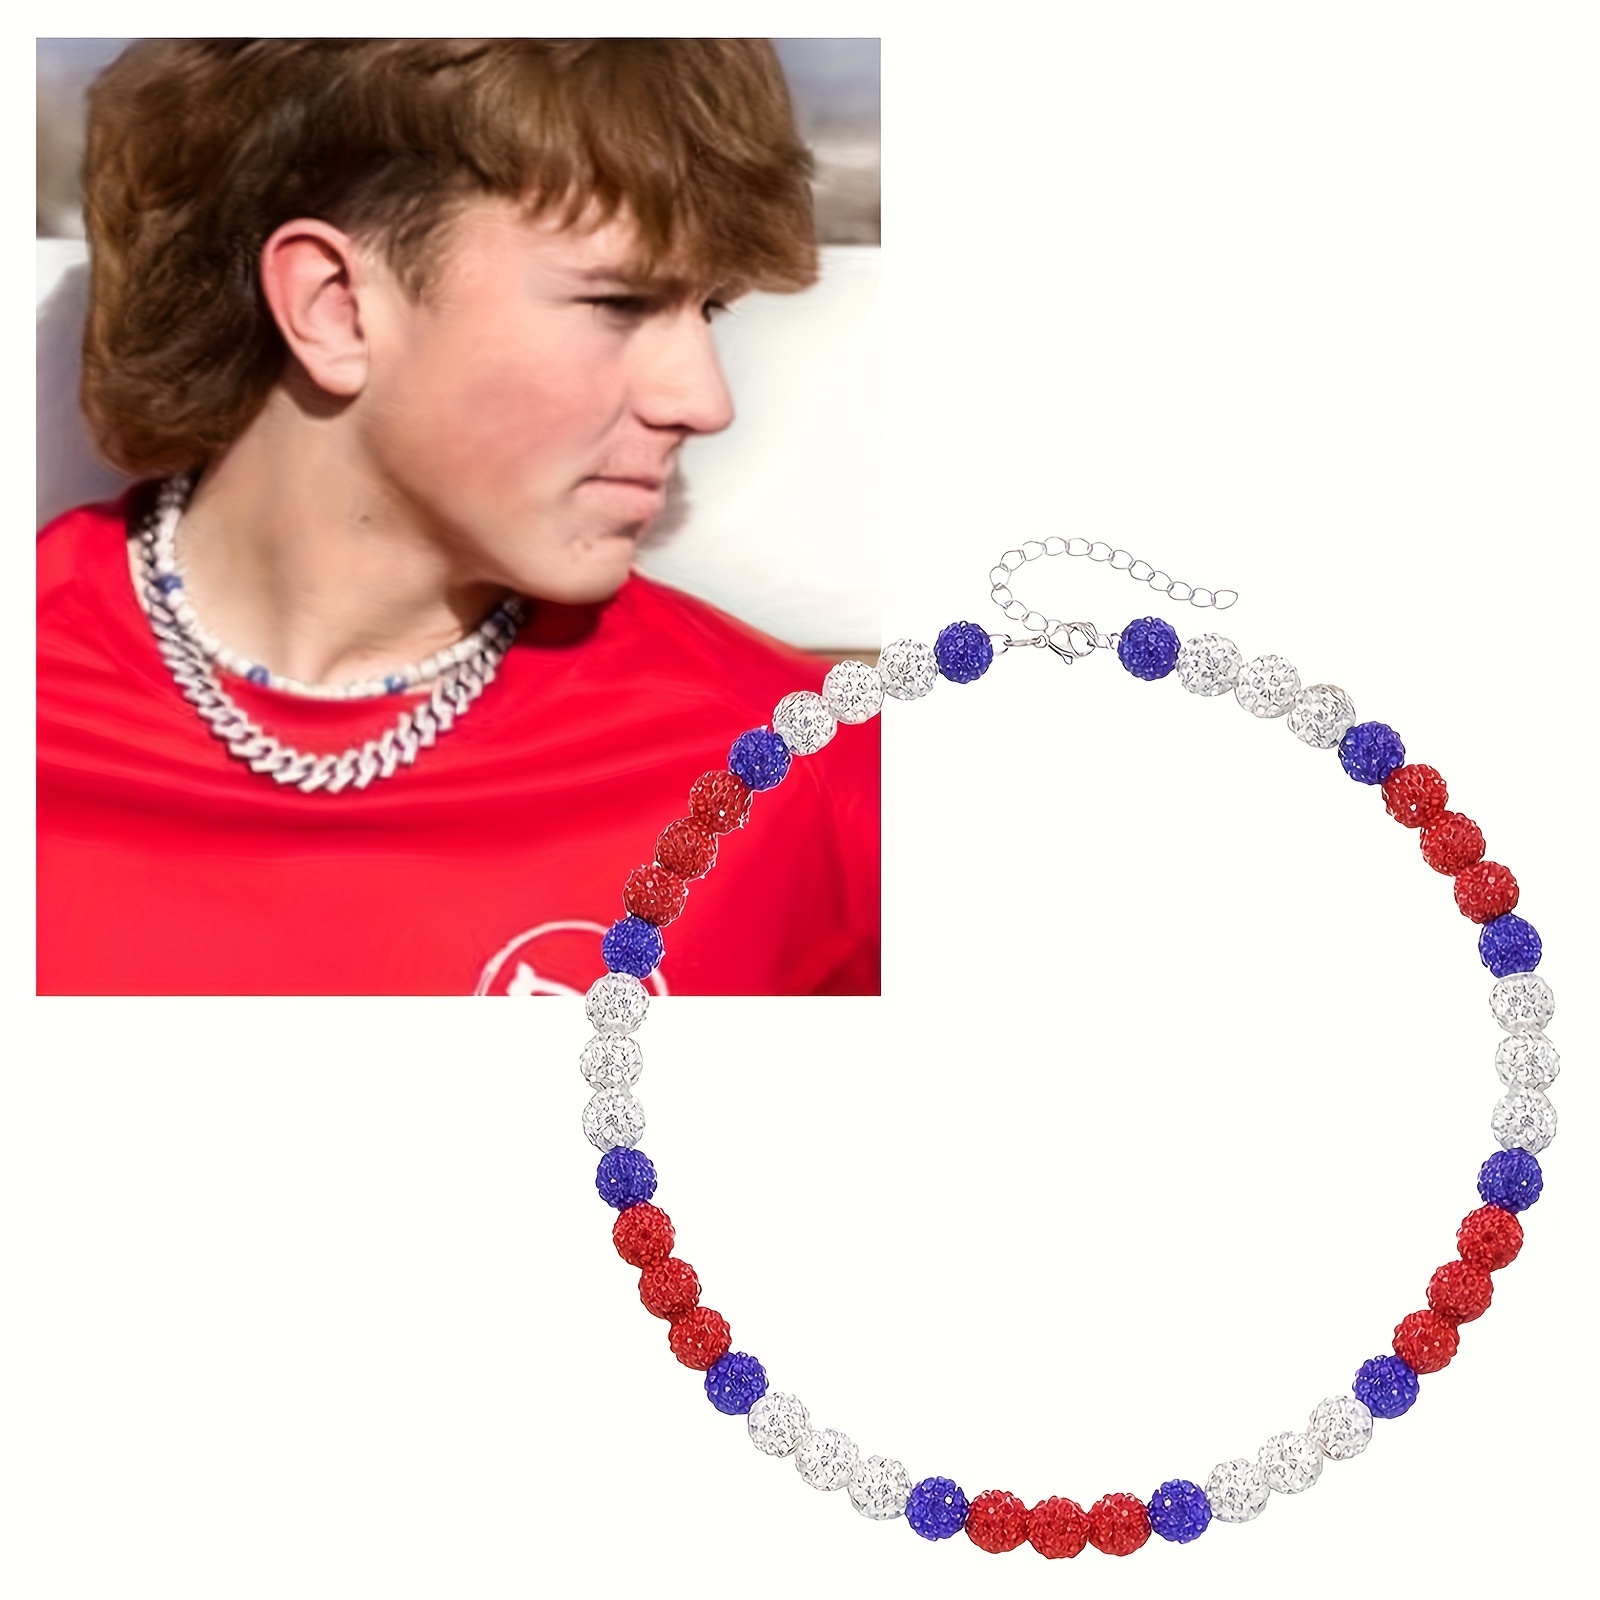 

Crystal Bling Baseball Necklace, 18-inch Patriotic Sports-, Fashionable Athletic Accessory For Sports Fans